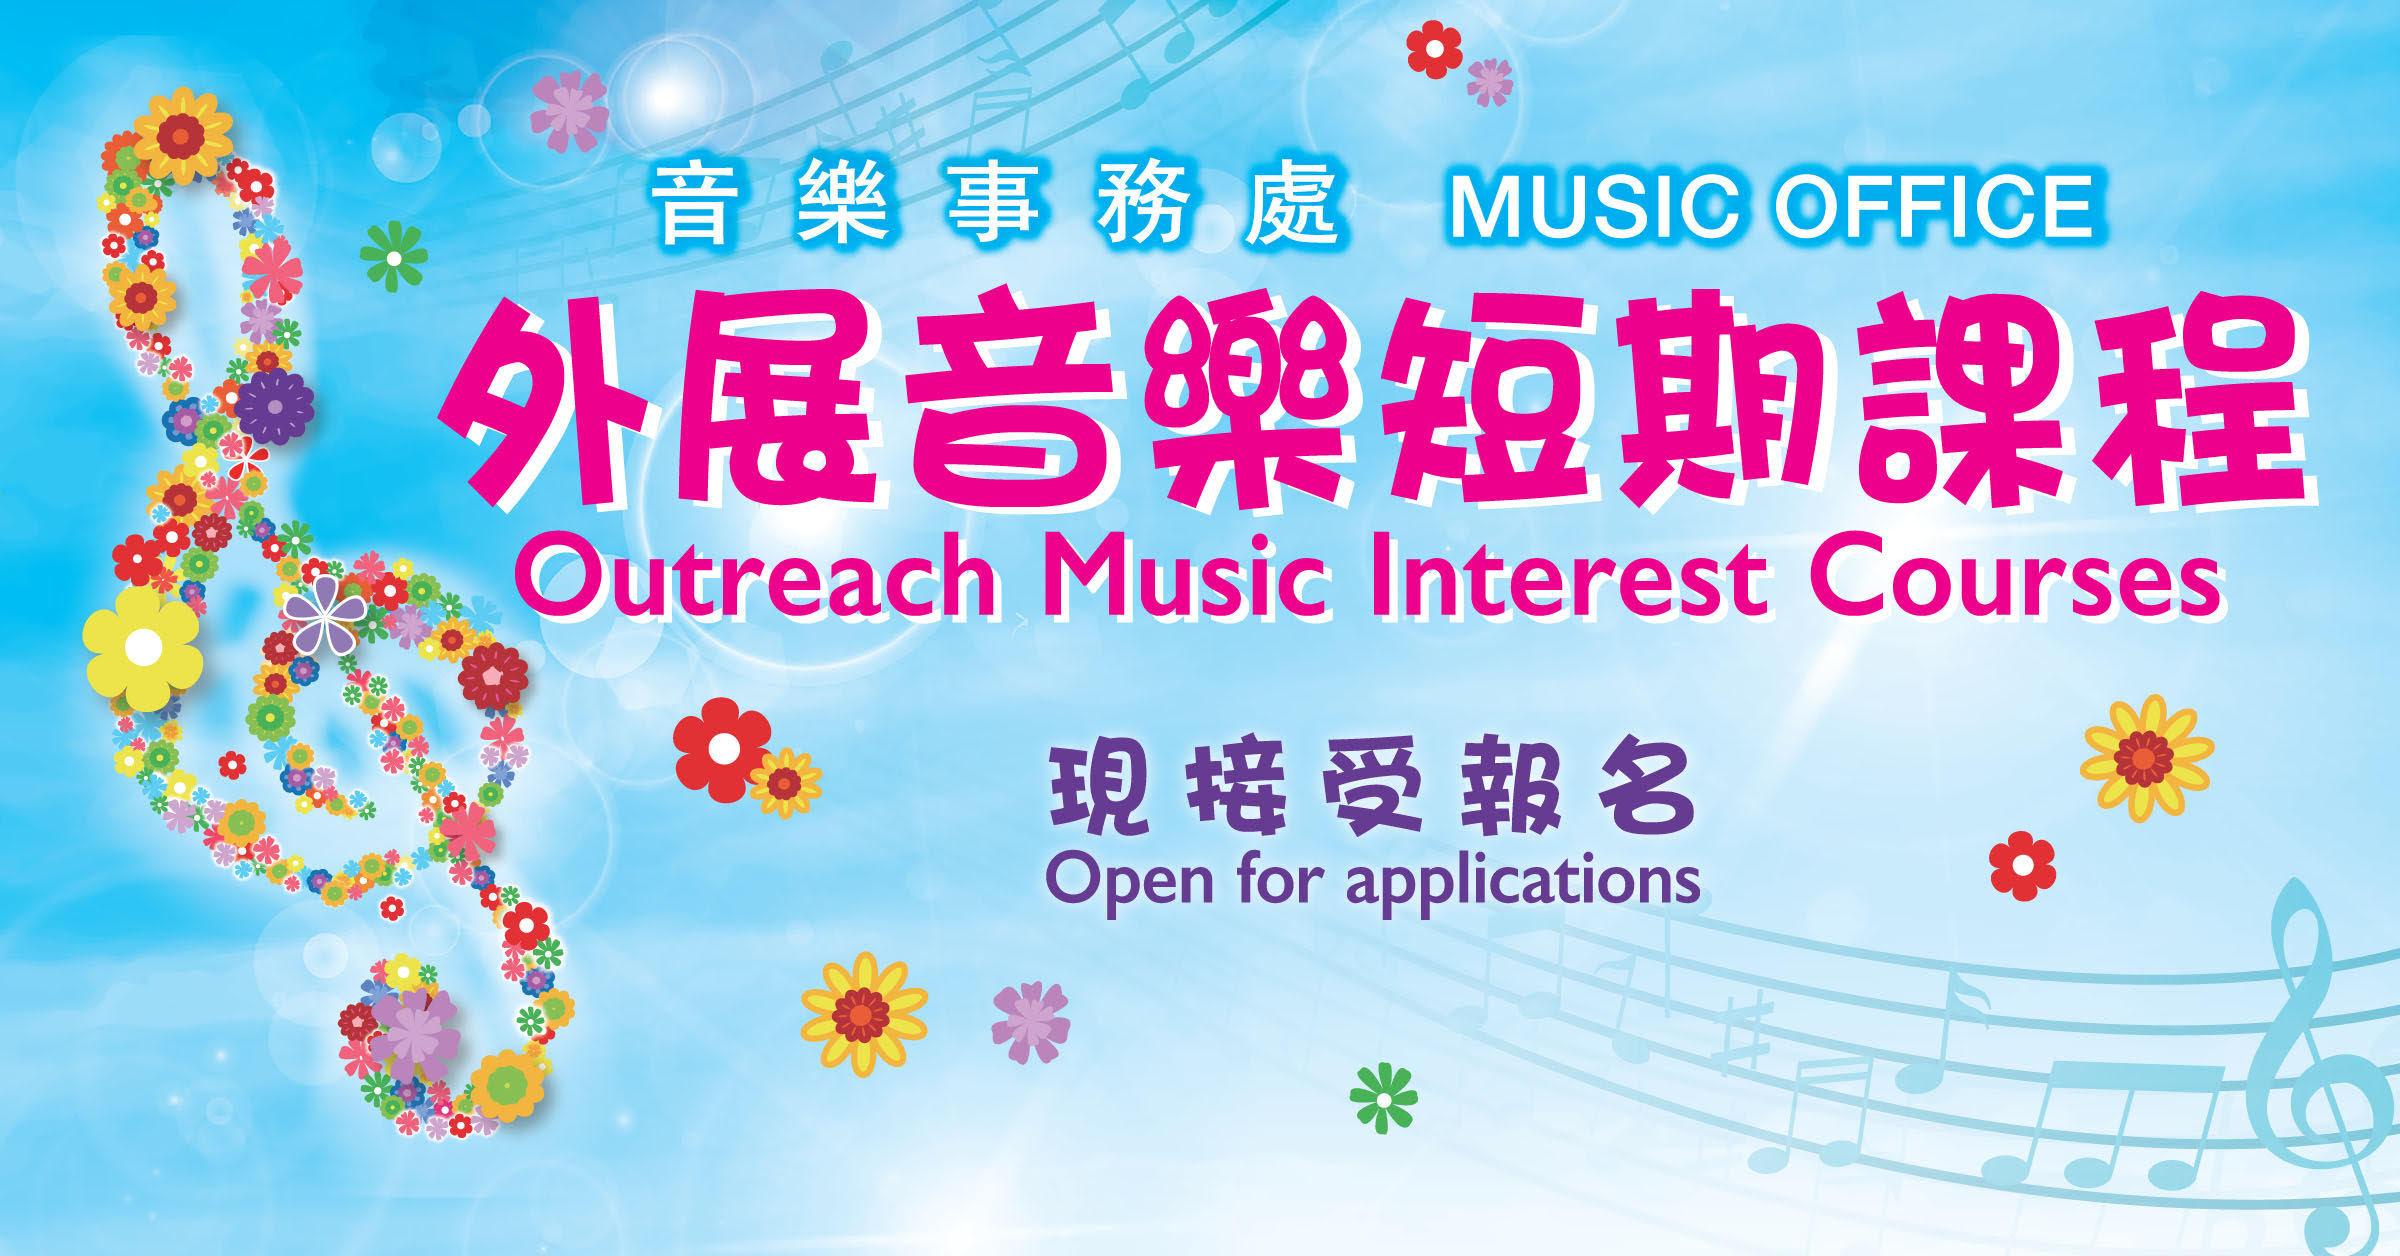 Recruitment for Outreach Music Interest Courses (Applications close on 25 Jan)